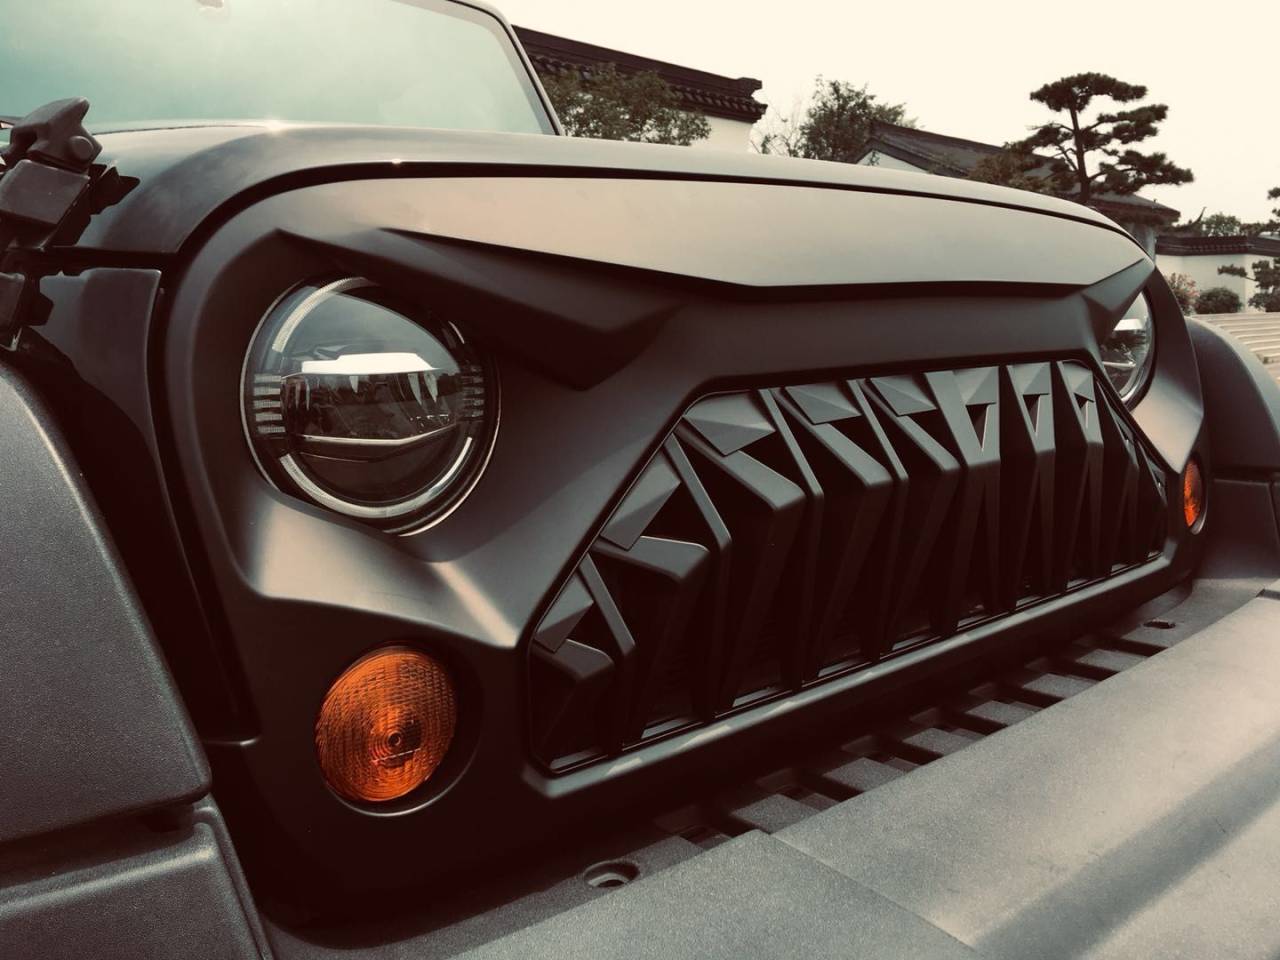 On Sale: Jeep Wrangler JK ABS Armor II Style Front Grill matte black 1038 - Jeep  Wrangler Angry Grilles - Jeep Wrangler Offroad Accessories & Parts in  Brisbane